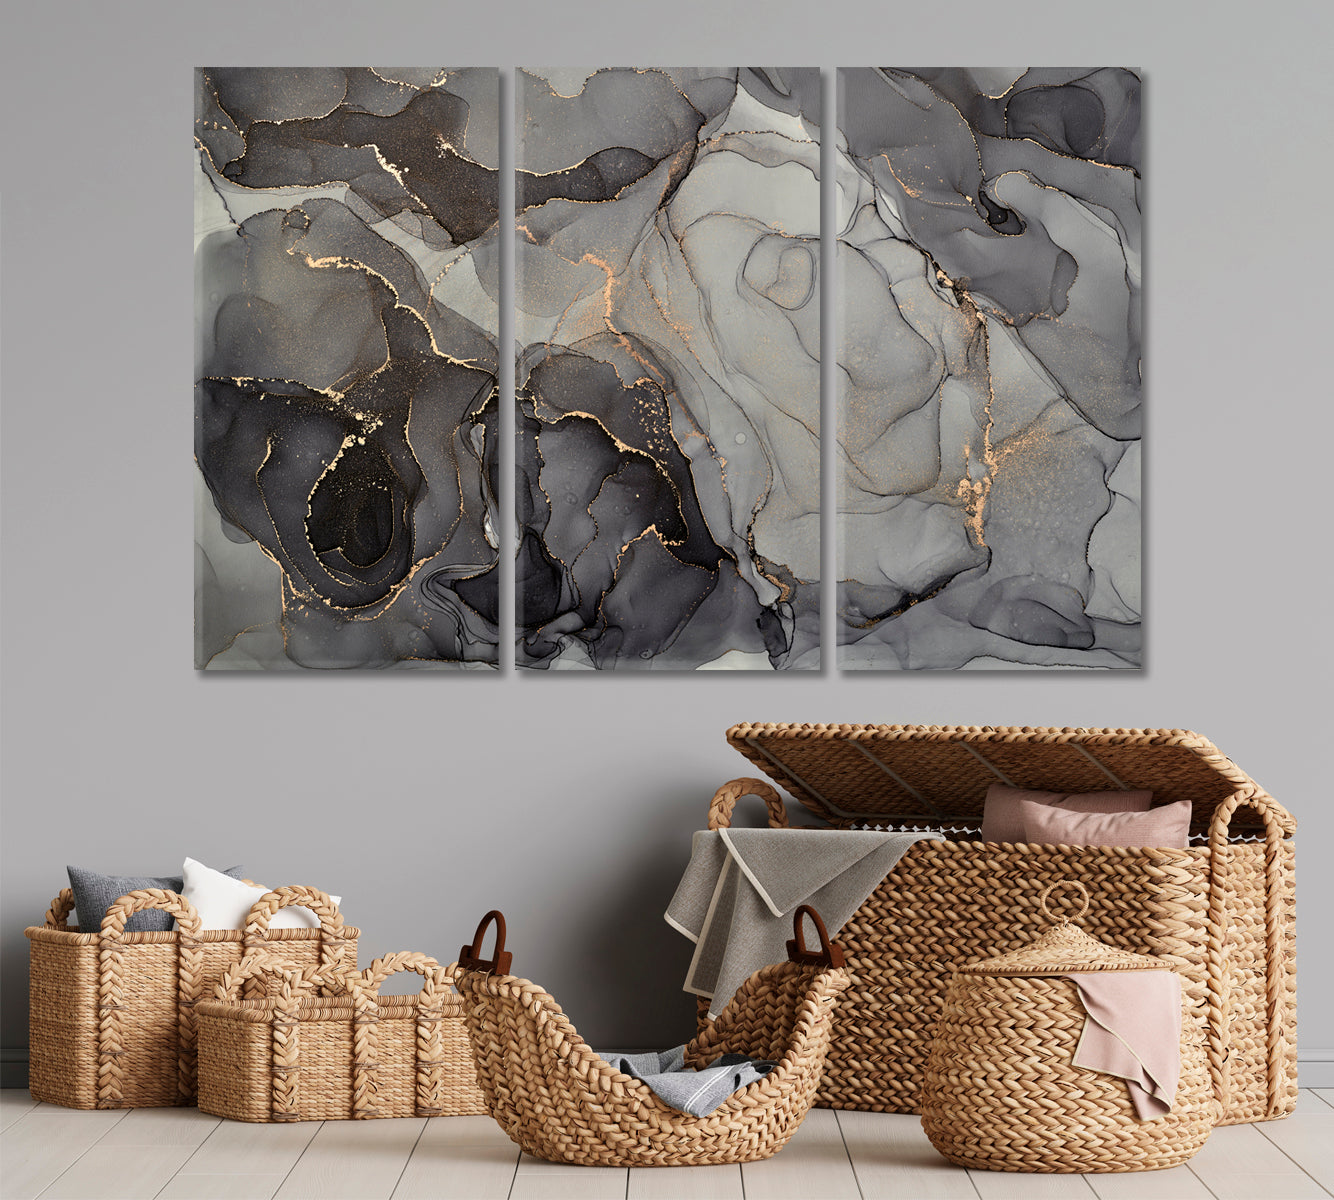 Black Gray Marble Alcohol Ink Stains Translucent Waves Fluid Art, Oriental Marbling Canvas Print Artesty 3 panels 36" x 24" 